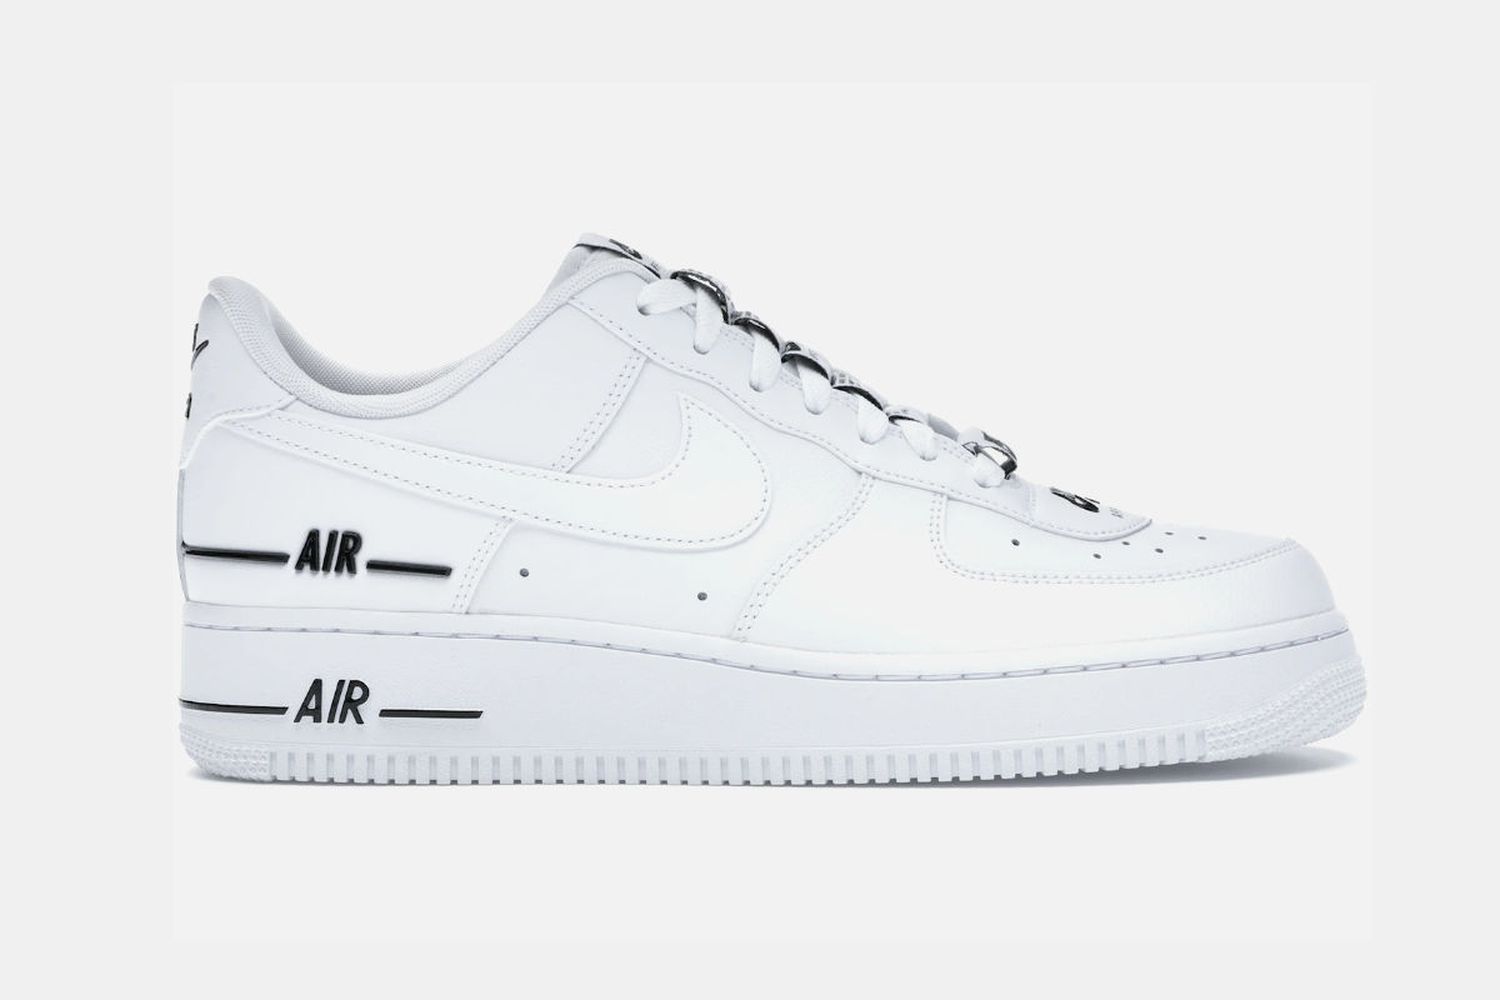 Air Force 1 Double Air Sneakers